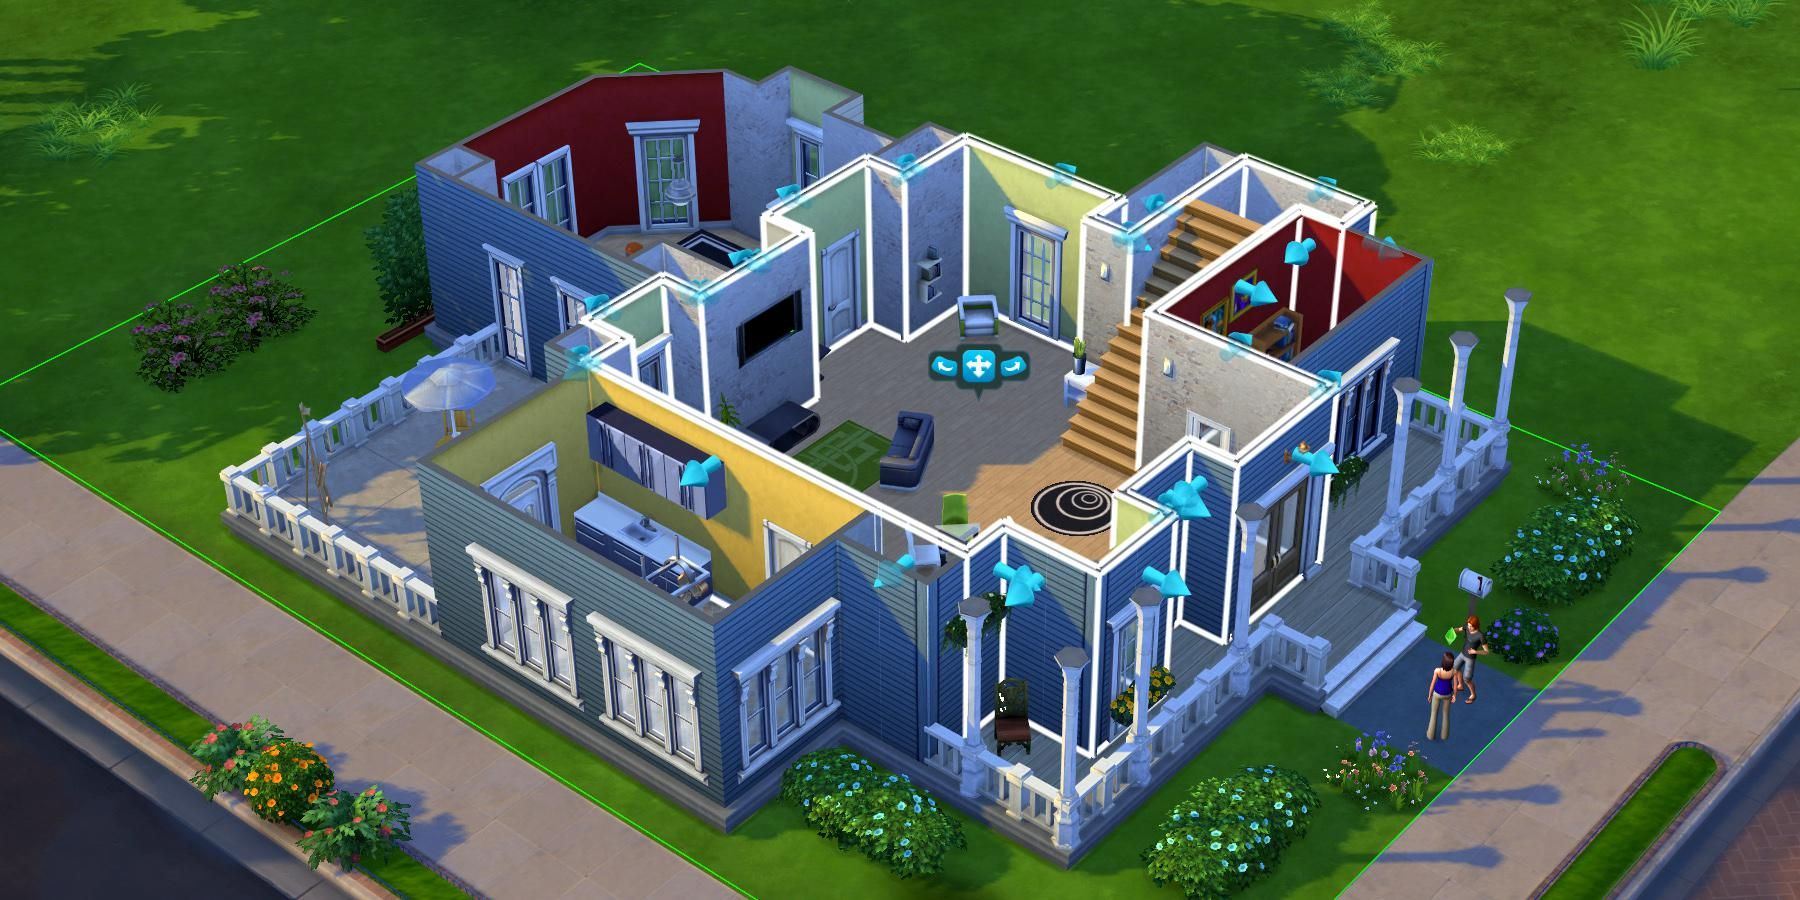 How to Build in the Sims 4  Top Cheat Codes and Tips for Building